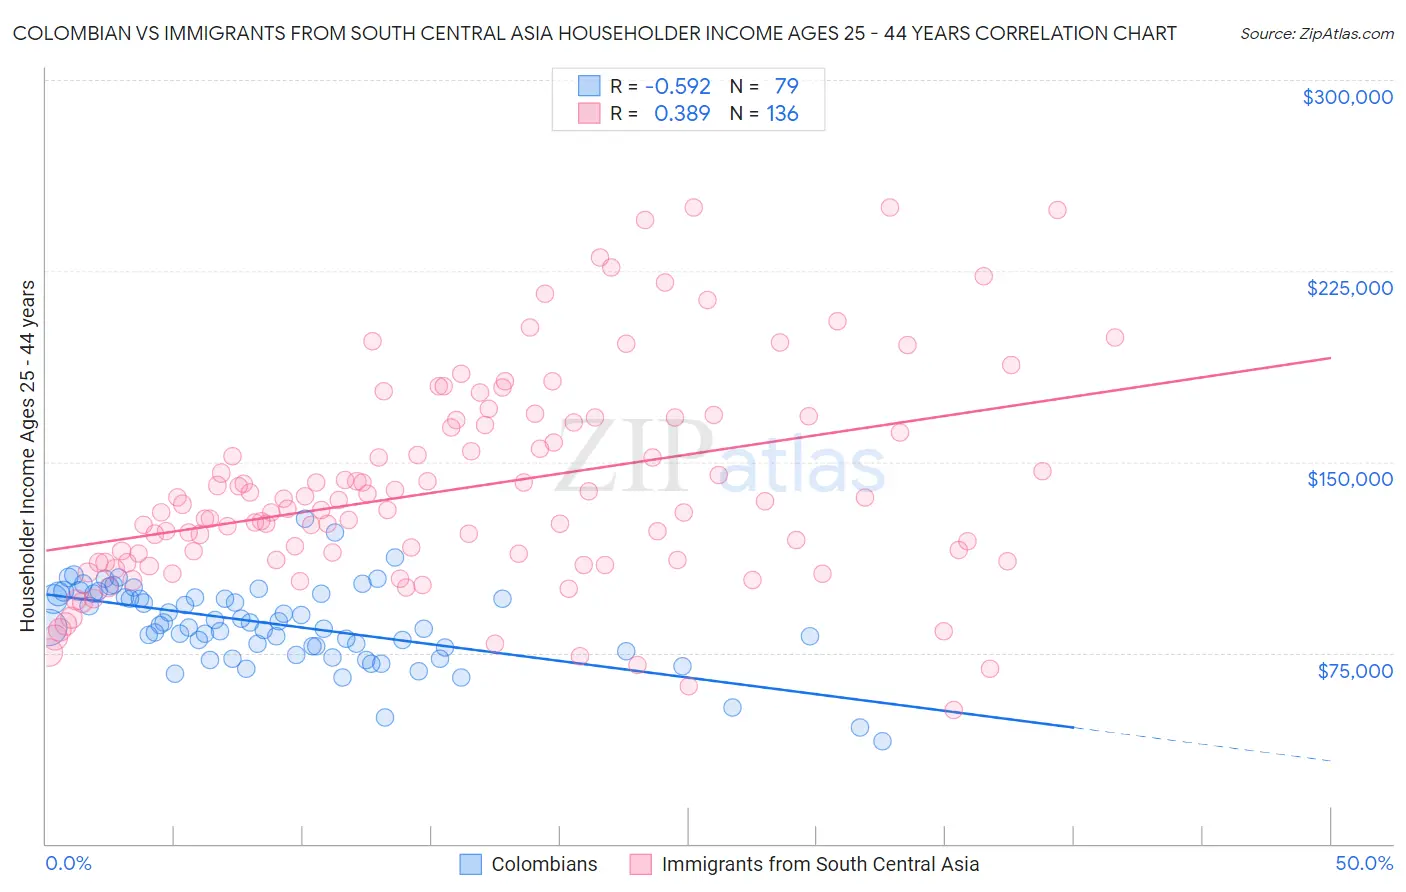 Colombian vs Immigrants from South Central Asia Householder Income Ages 25 - 44 years